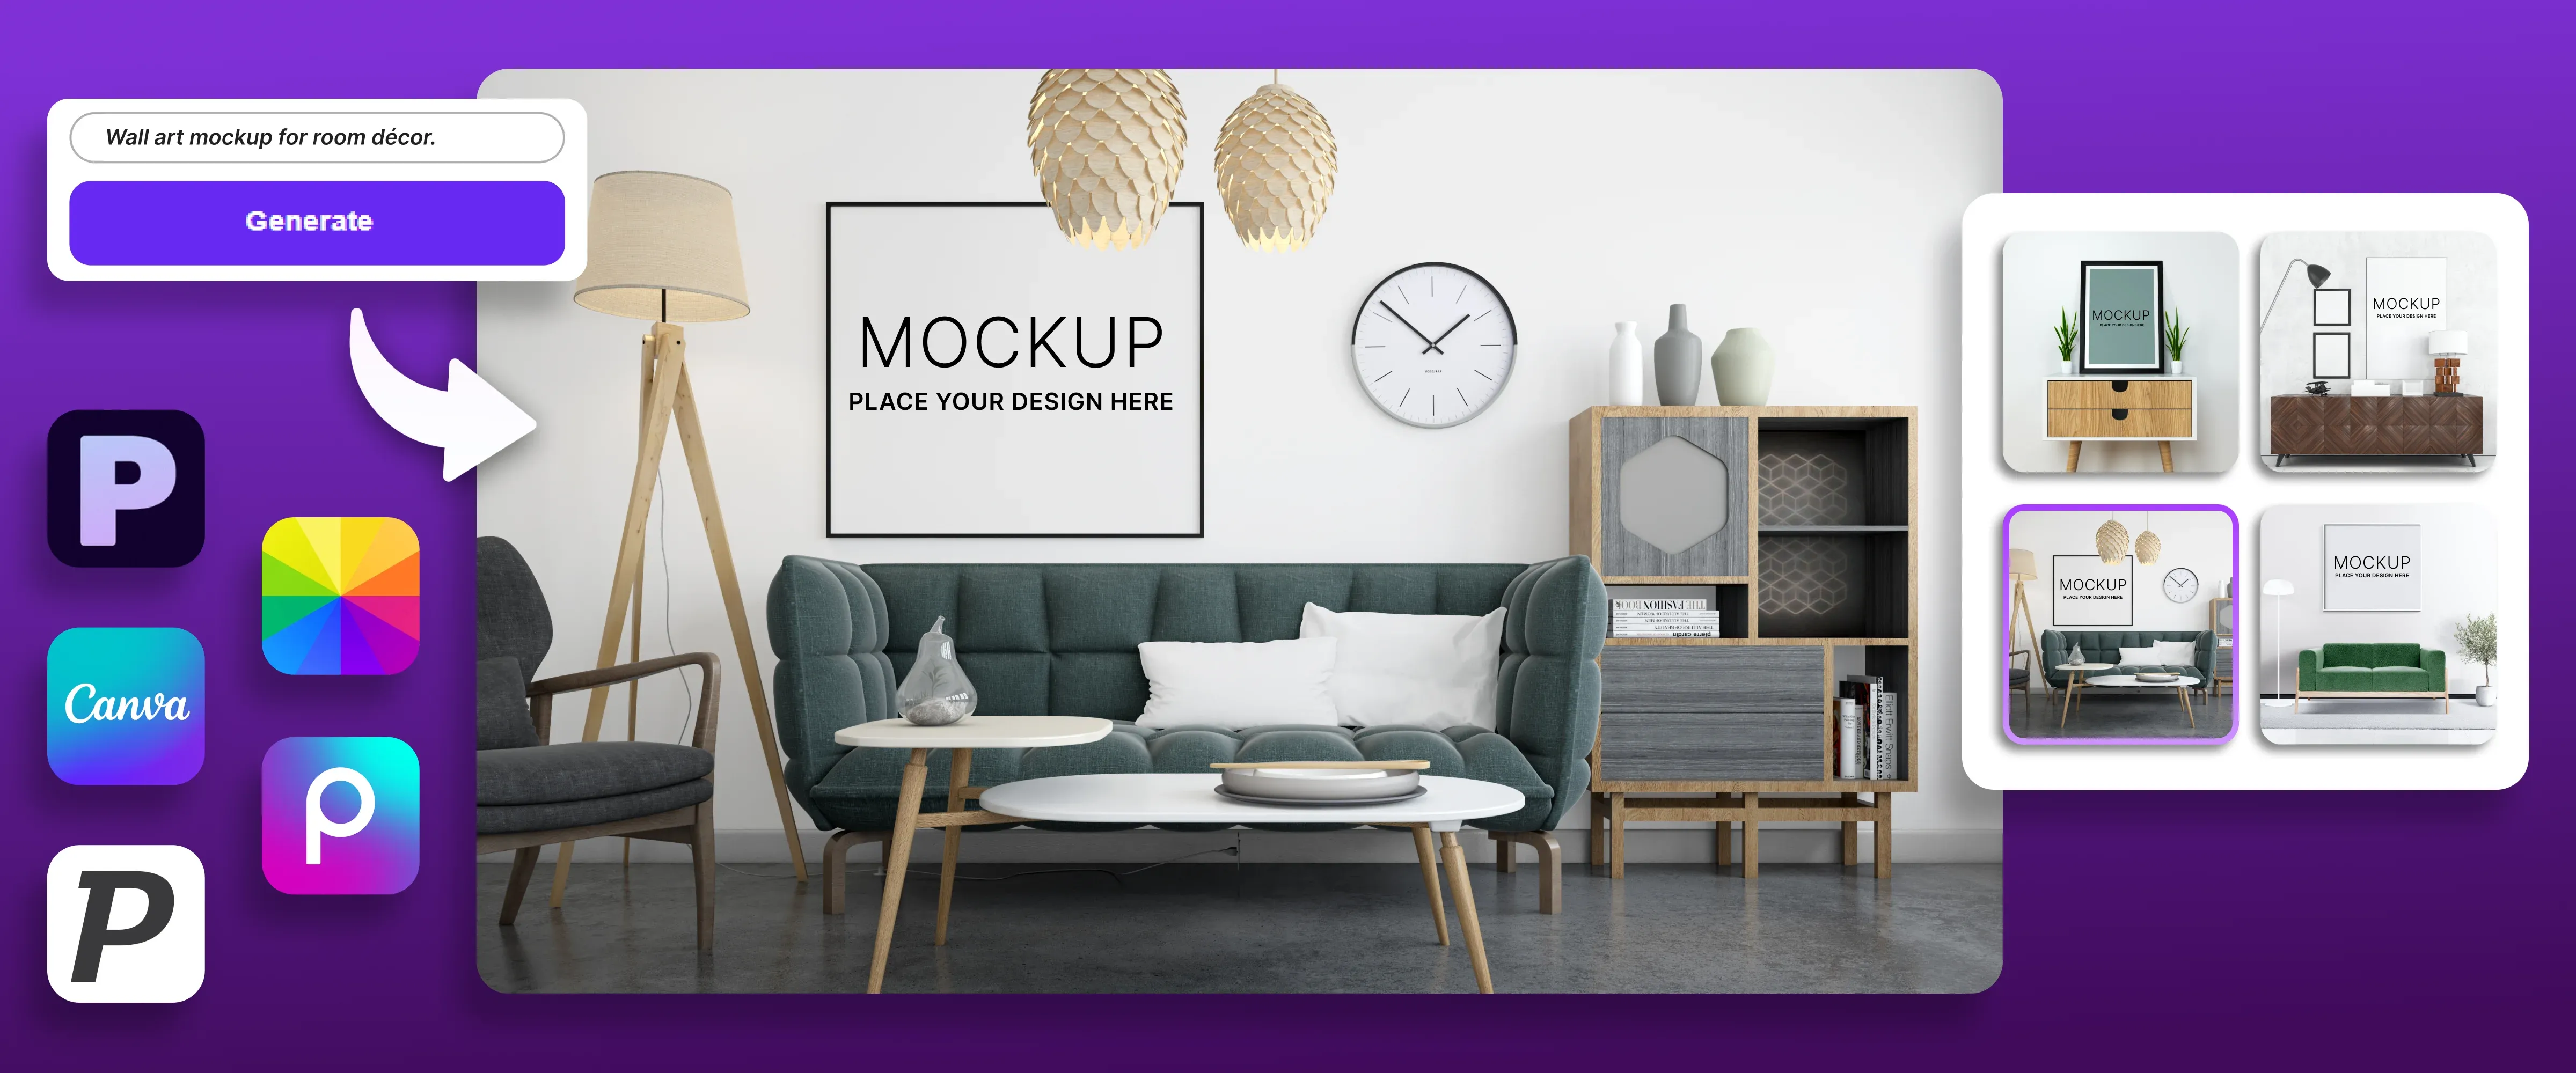 5 Best Mockup Generator Tools for Businesses cover